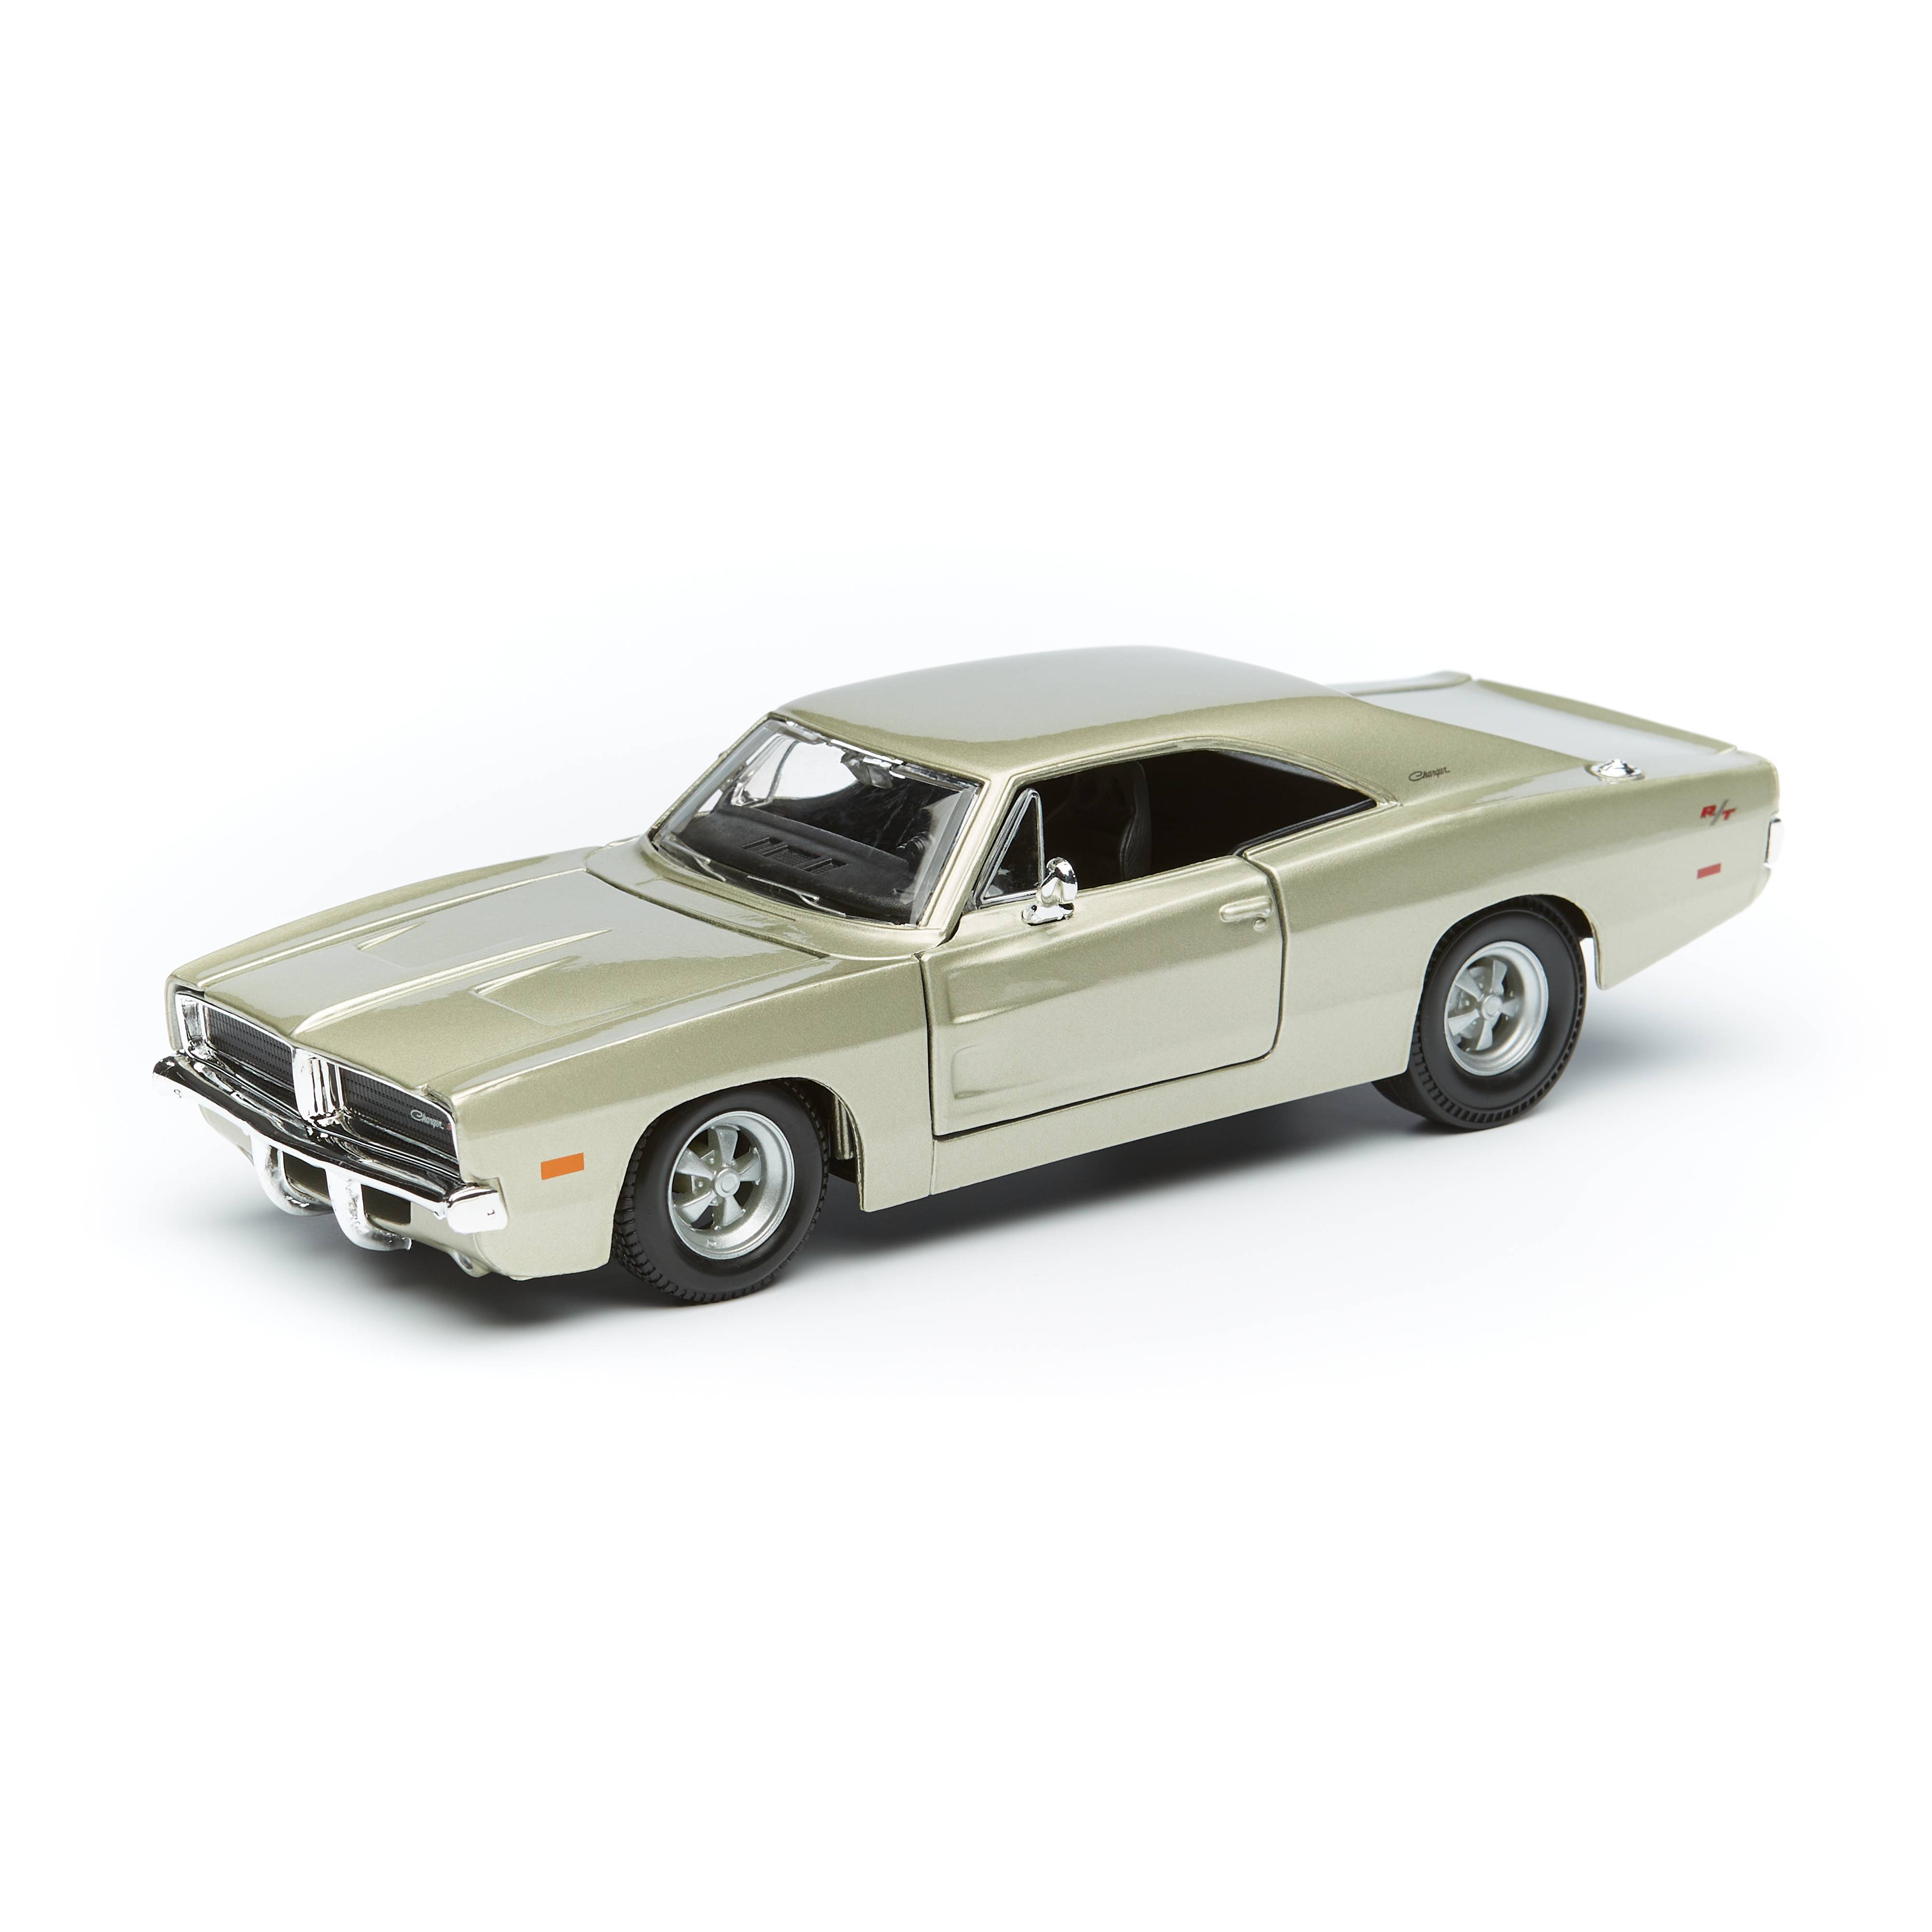 Maisto Машинка Dodge Charger R/T 1969, 1:25 31256 maisto 1 18 1969 dodge charger r t alloy car model decorations datsun 240z 1956 wolkswagen beetle diecast vehicles collectibles